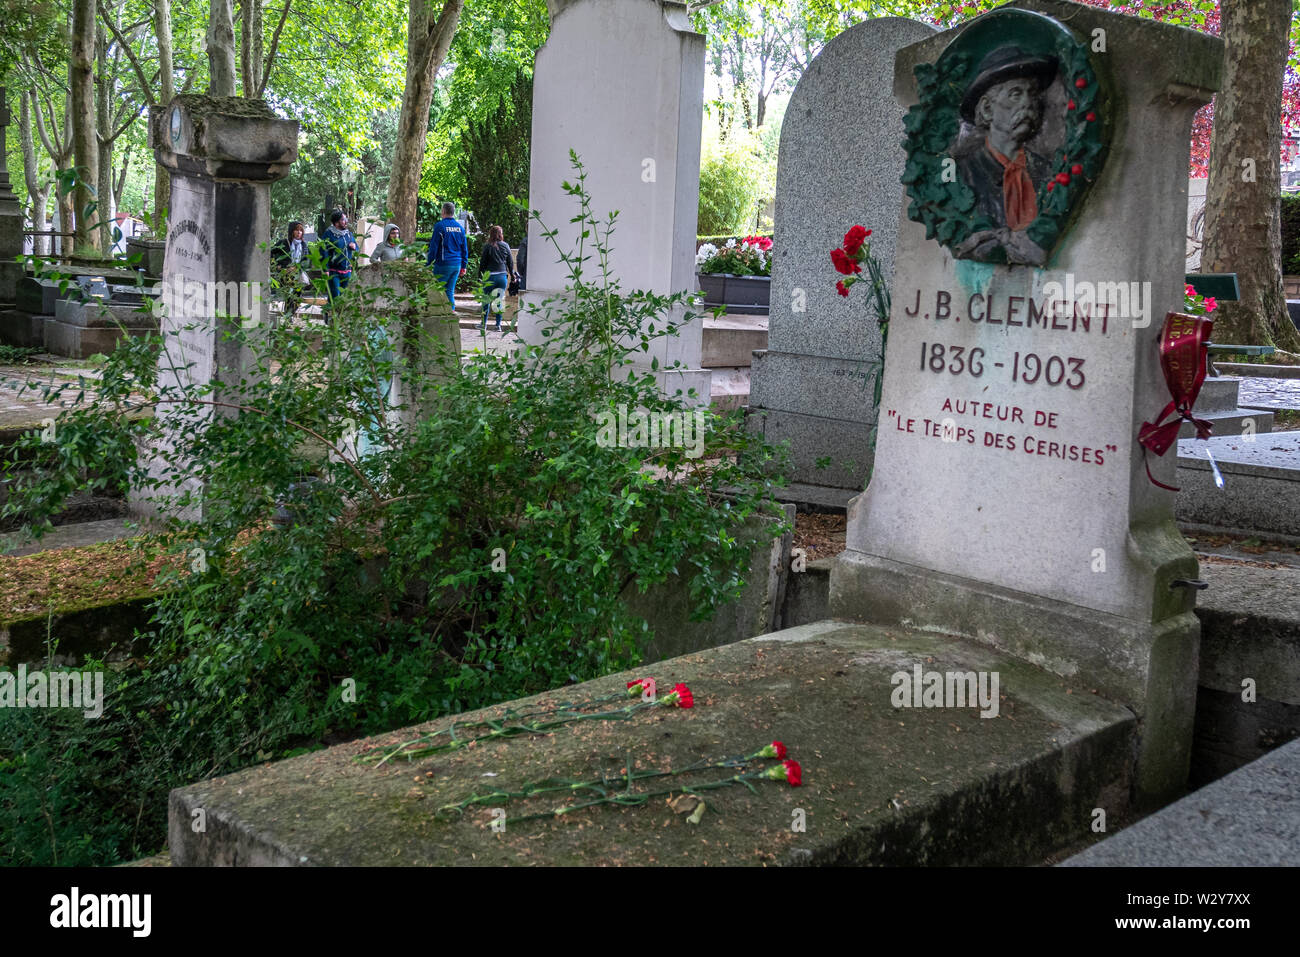 Paris, France - May 28, 2019: the tomb of Jean Baptiste Clement at the Pere Lachaise Cemetery. Stock Photo